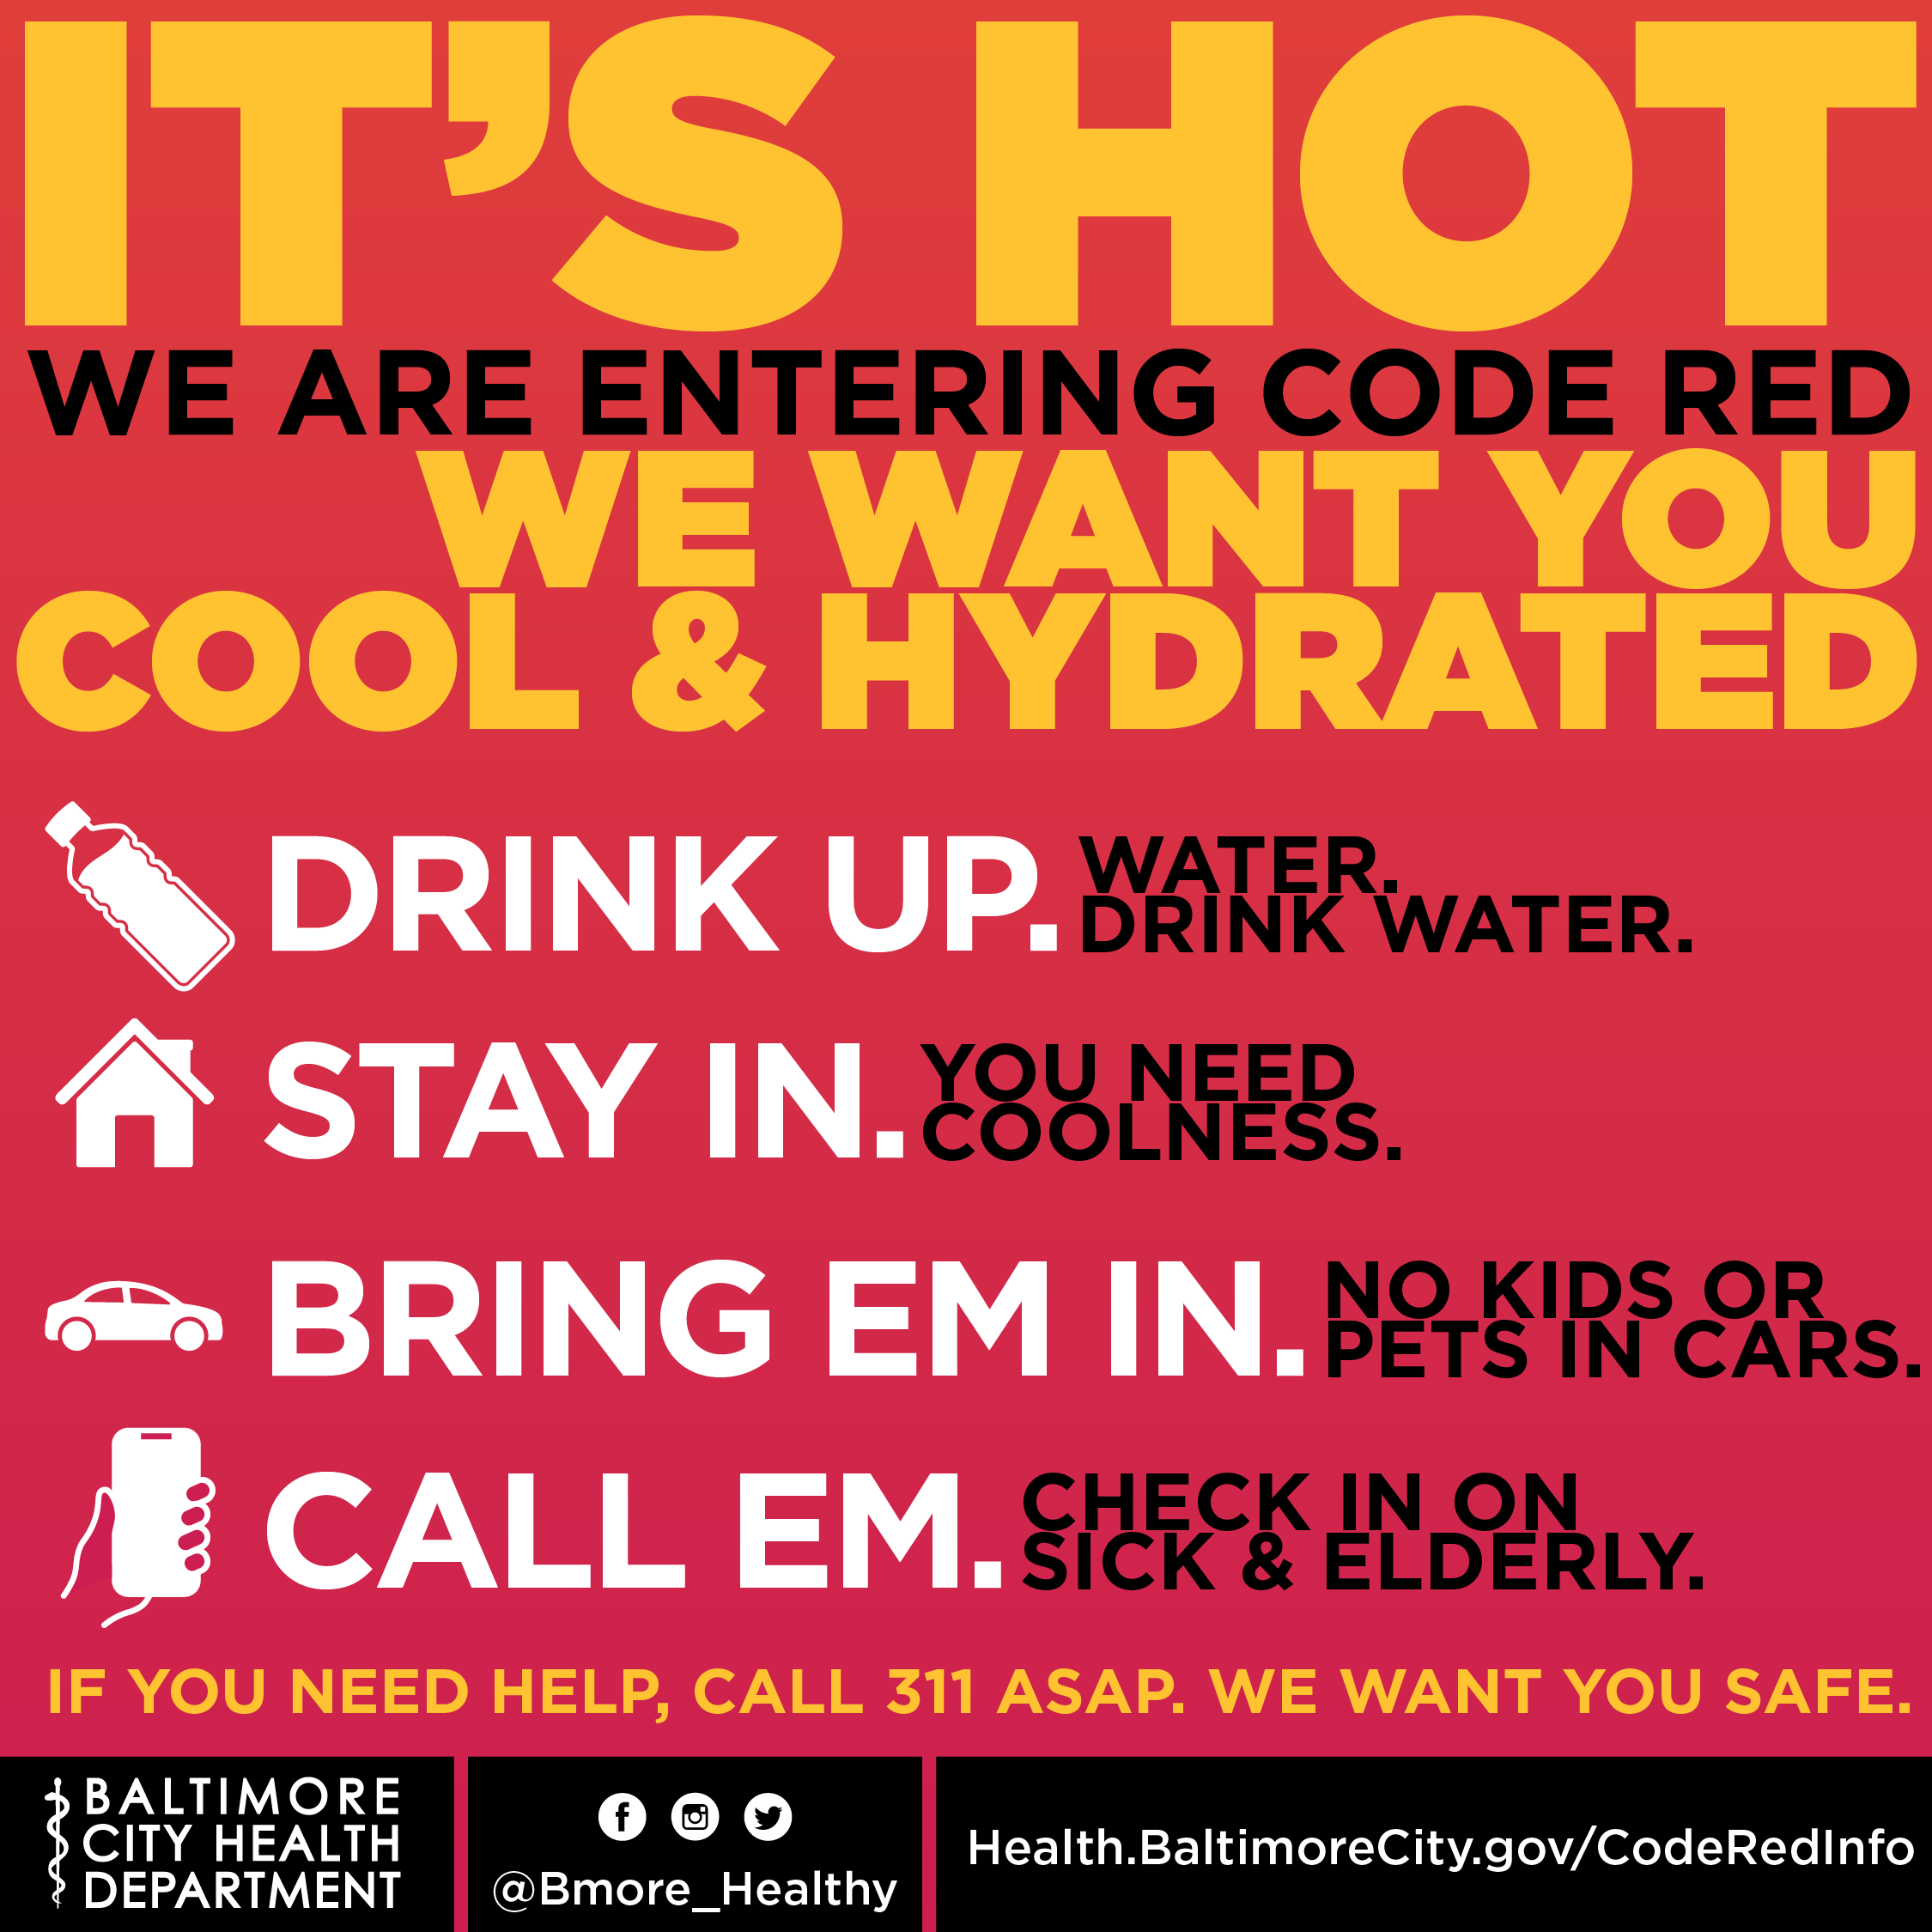 Its Hot! We are Entering Code Red, and we want you cool and hydrated. Drink water, Stay indoors, Bring your children and pets indoors and check on sick and older loved ones. If you need help, call 311 asap.